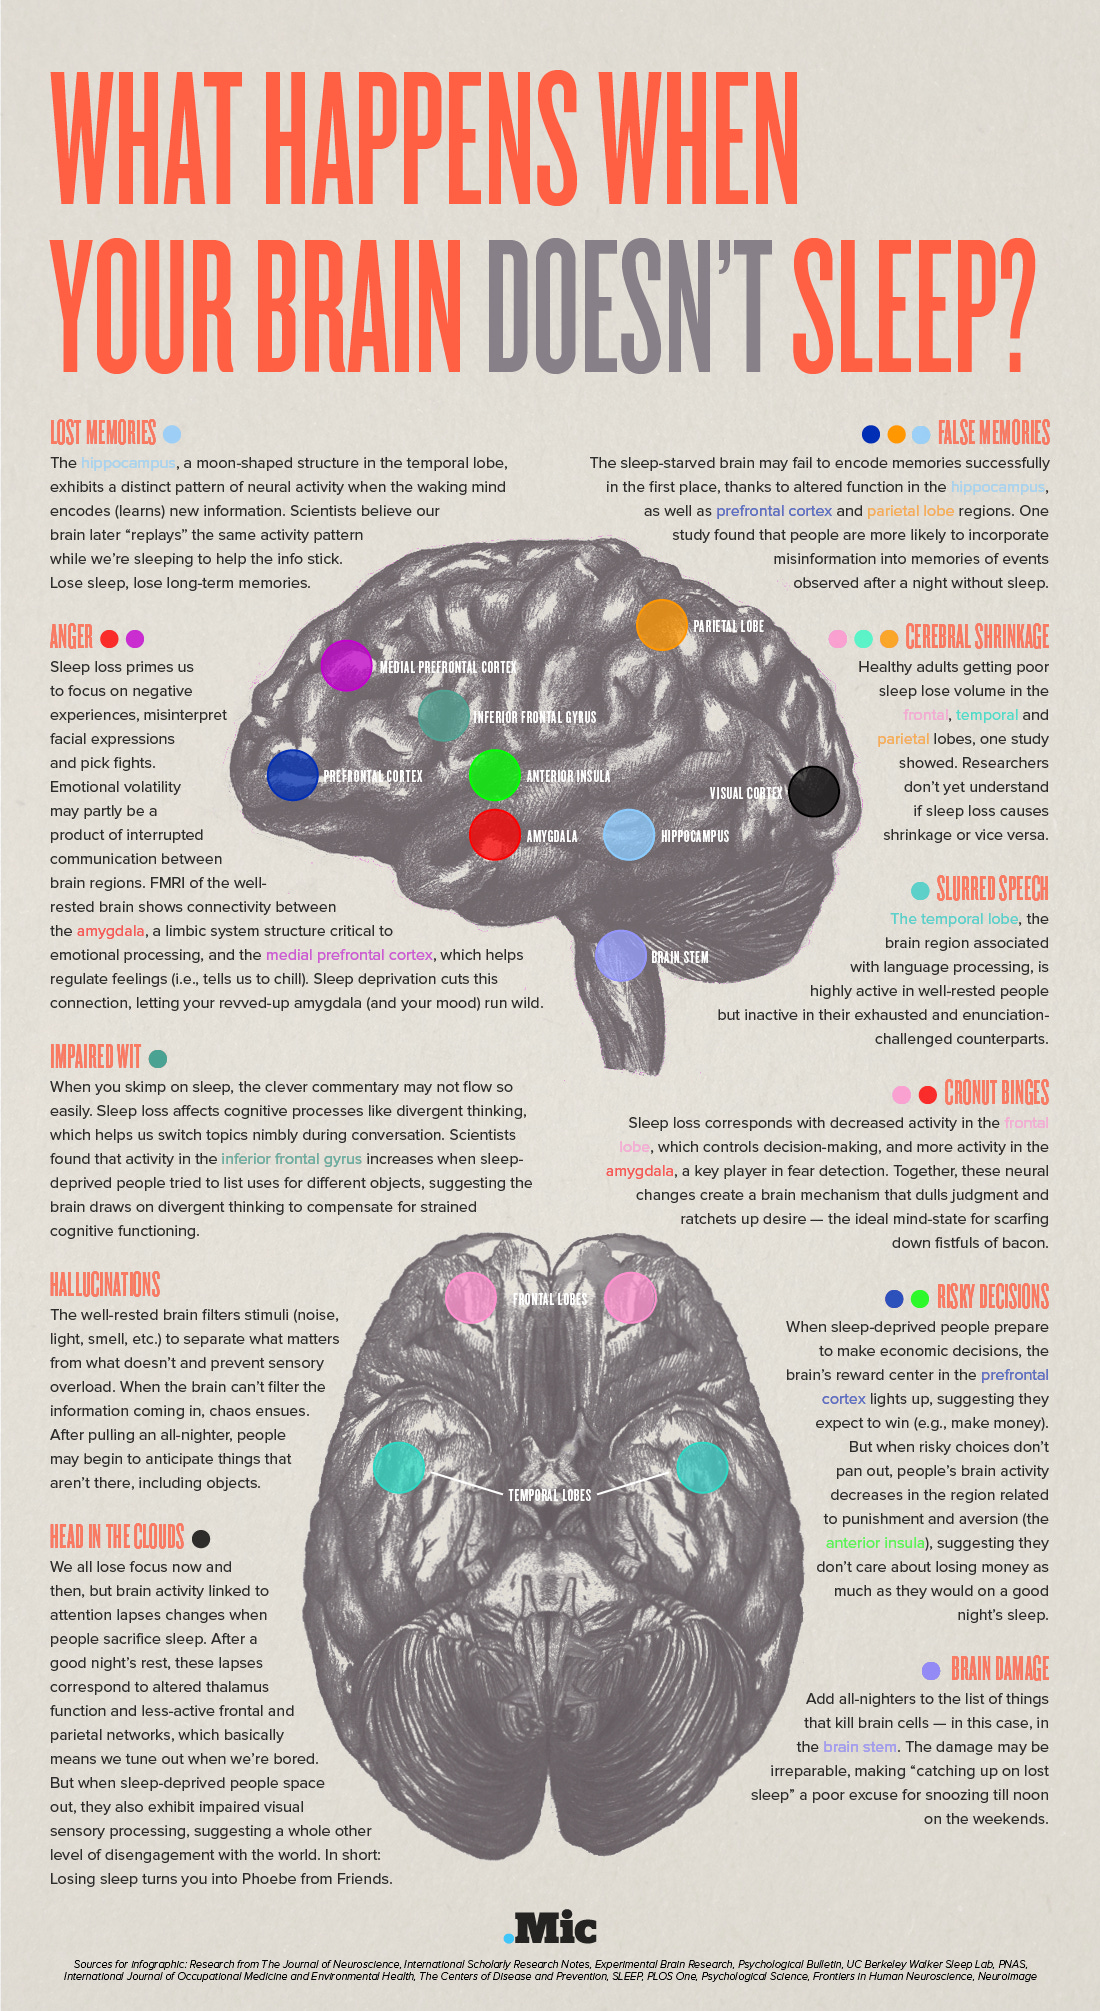 This Is Your Brain on Not Enough Sleep (Infographic)